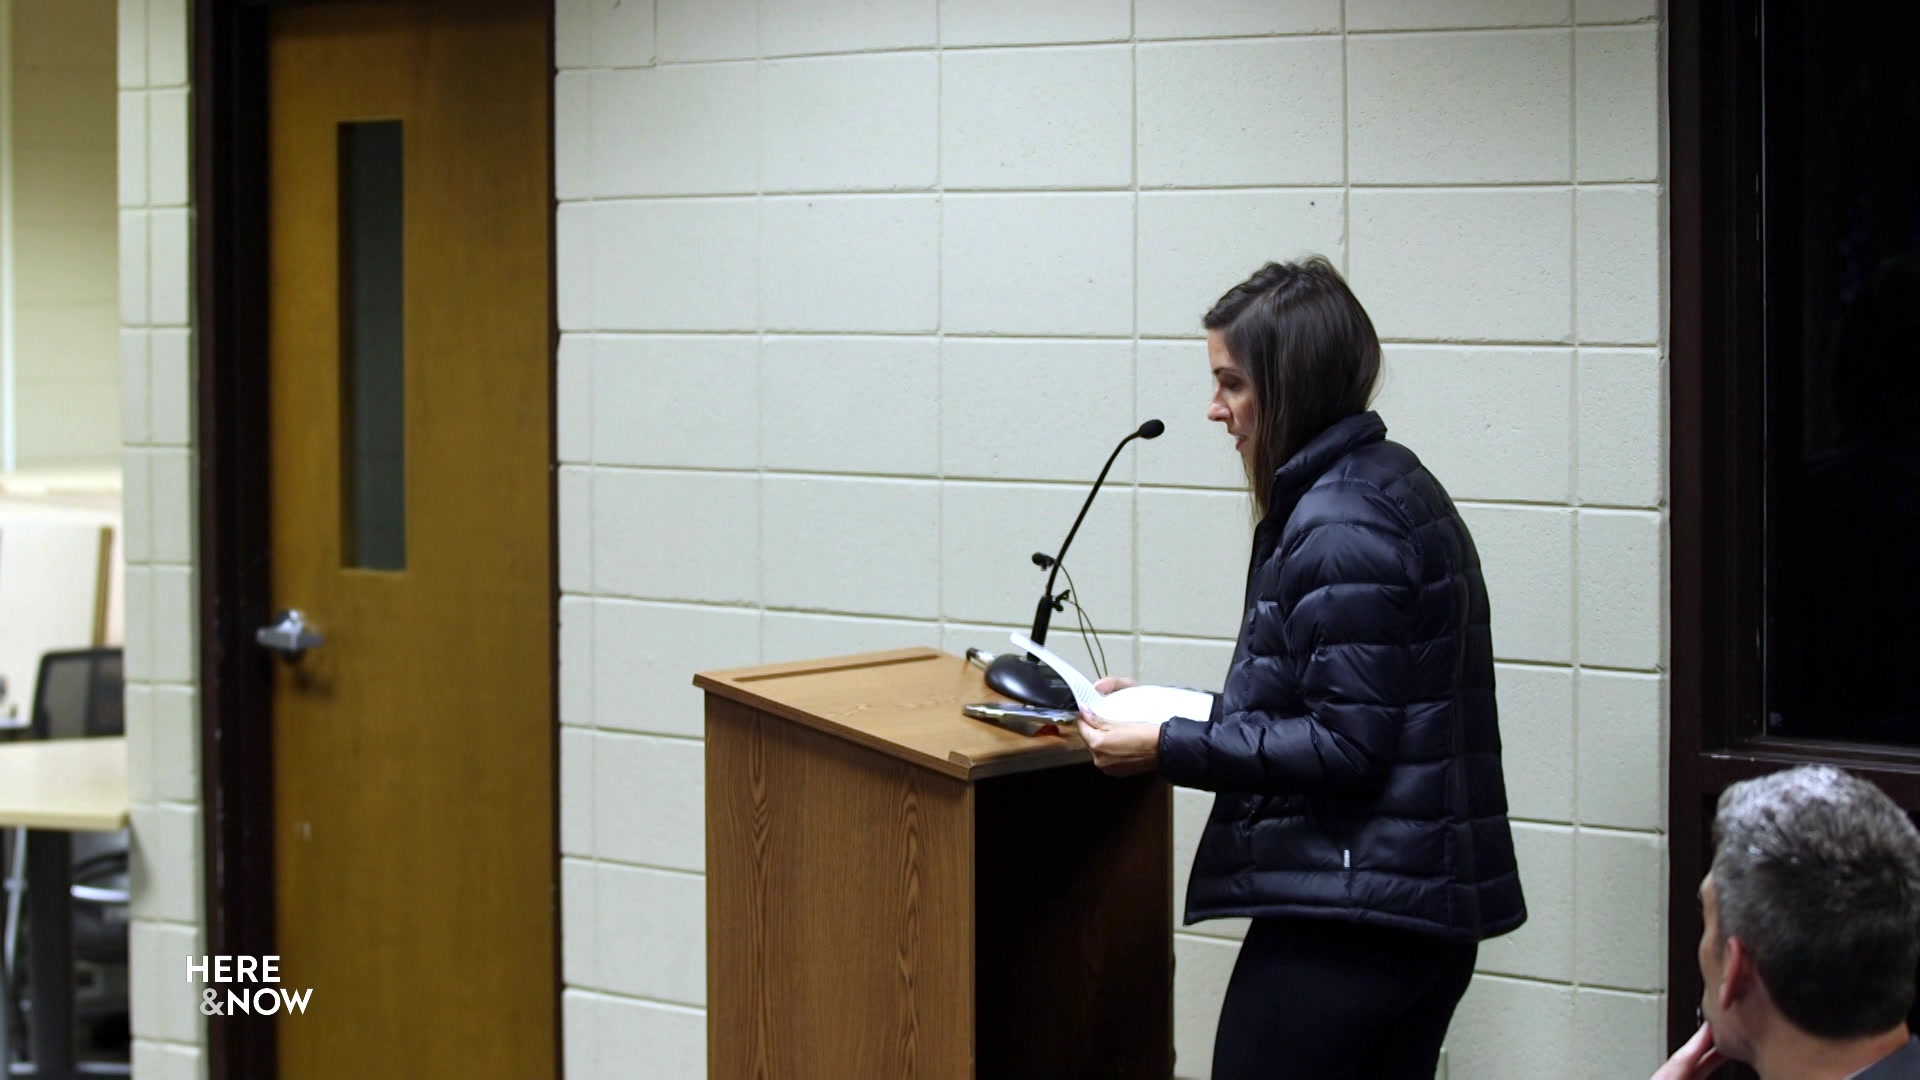 Amber Schroeder stands at a podium holding a piece of paper in front of a painted concrete-block wall.